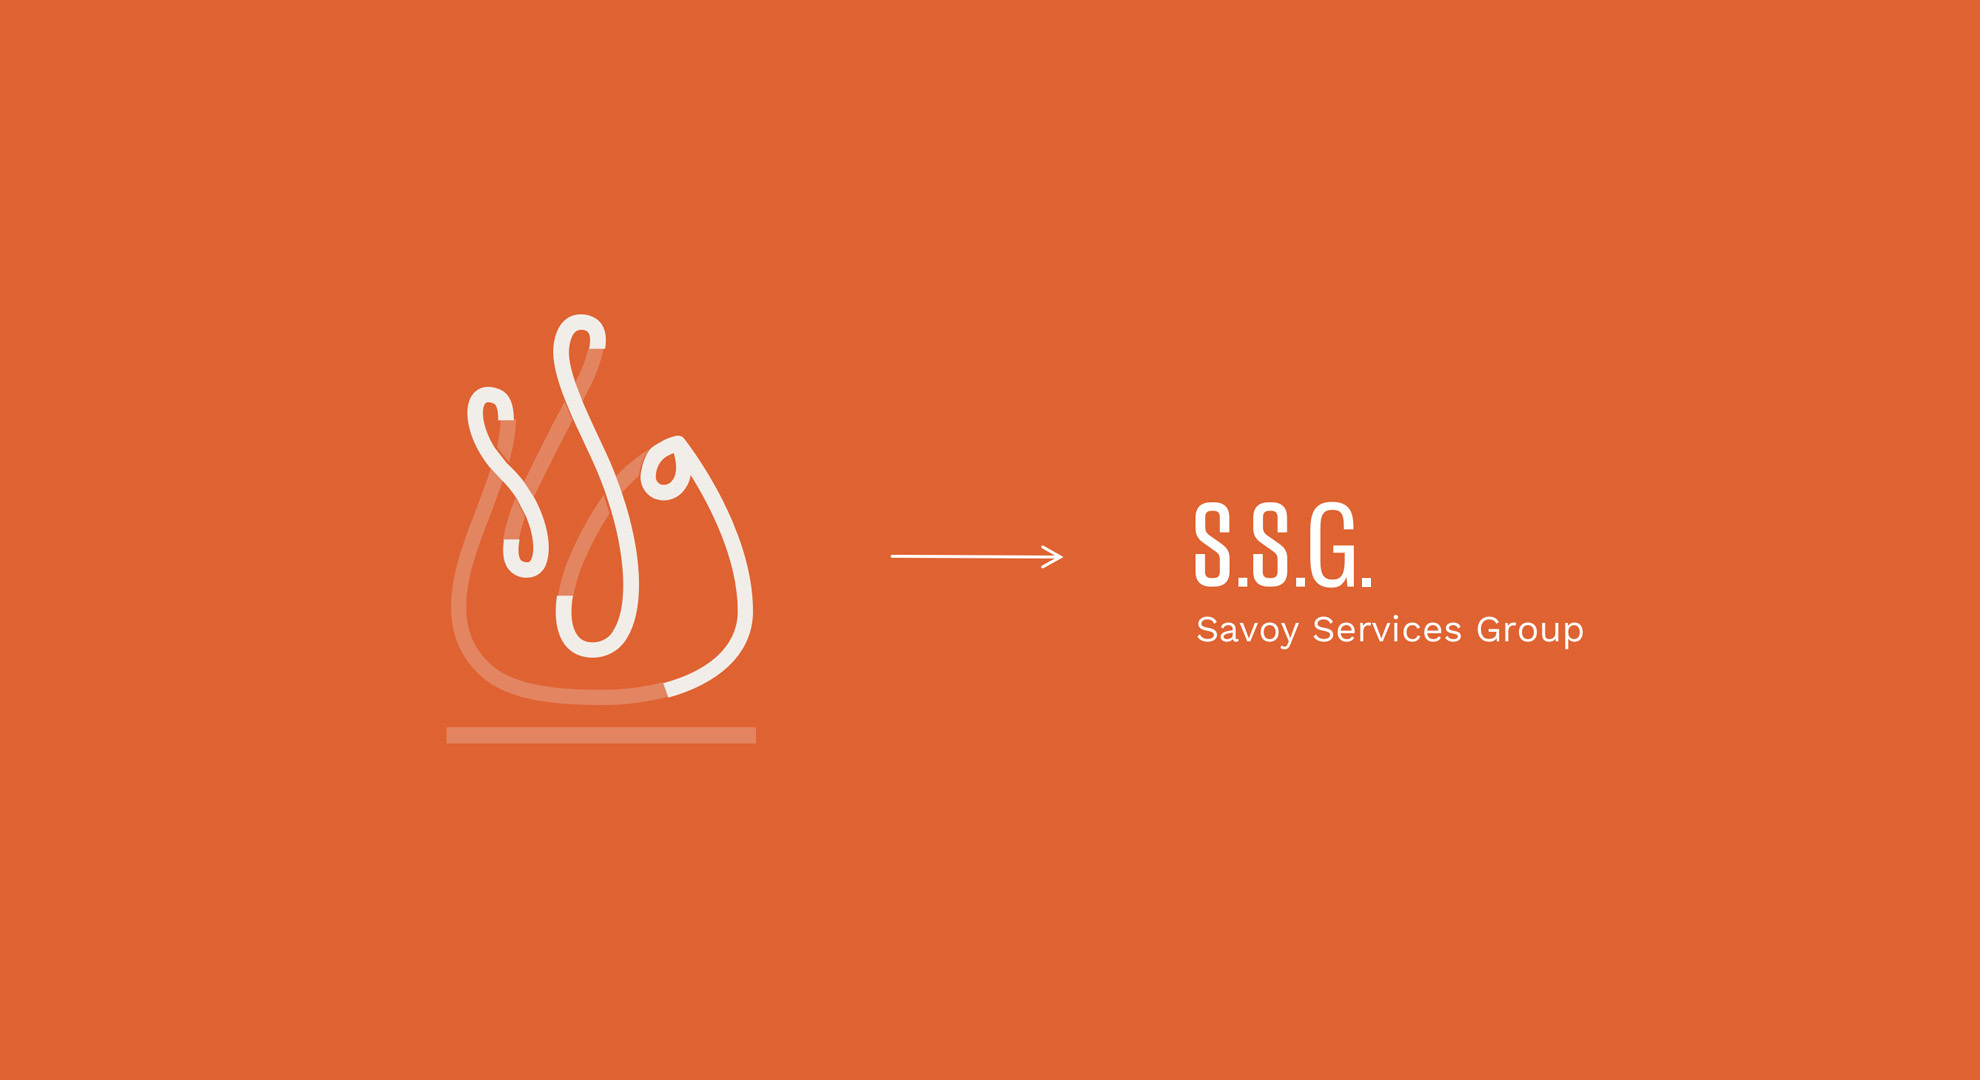 Savoy's logo includes its initials, SSG